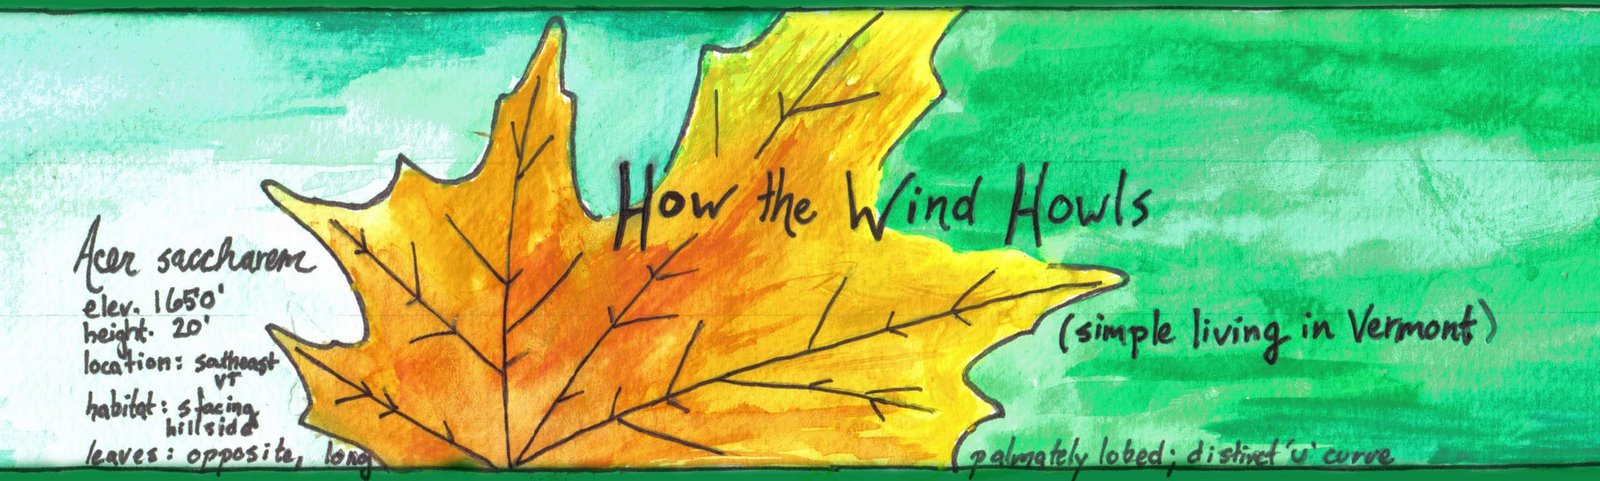 How the Wind Howls -- Simple Living in Vermont